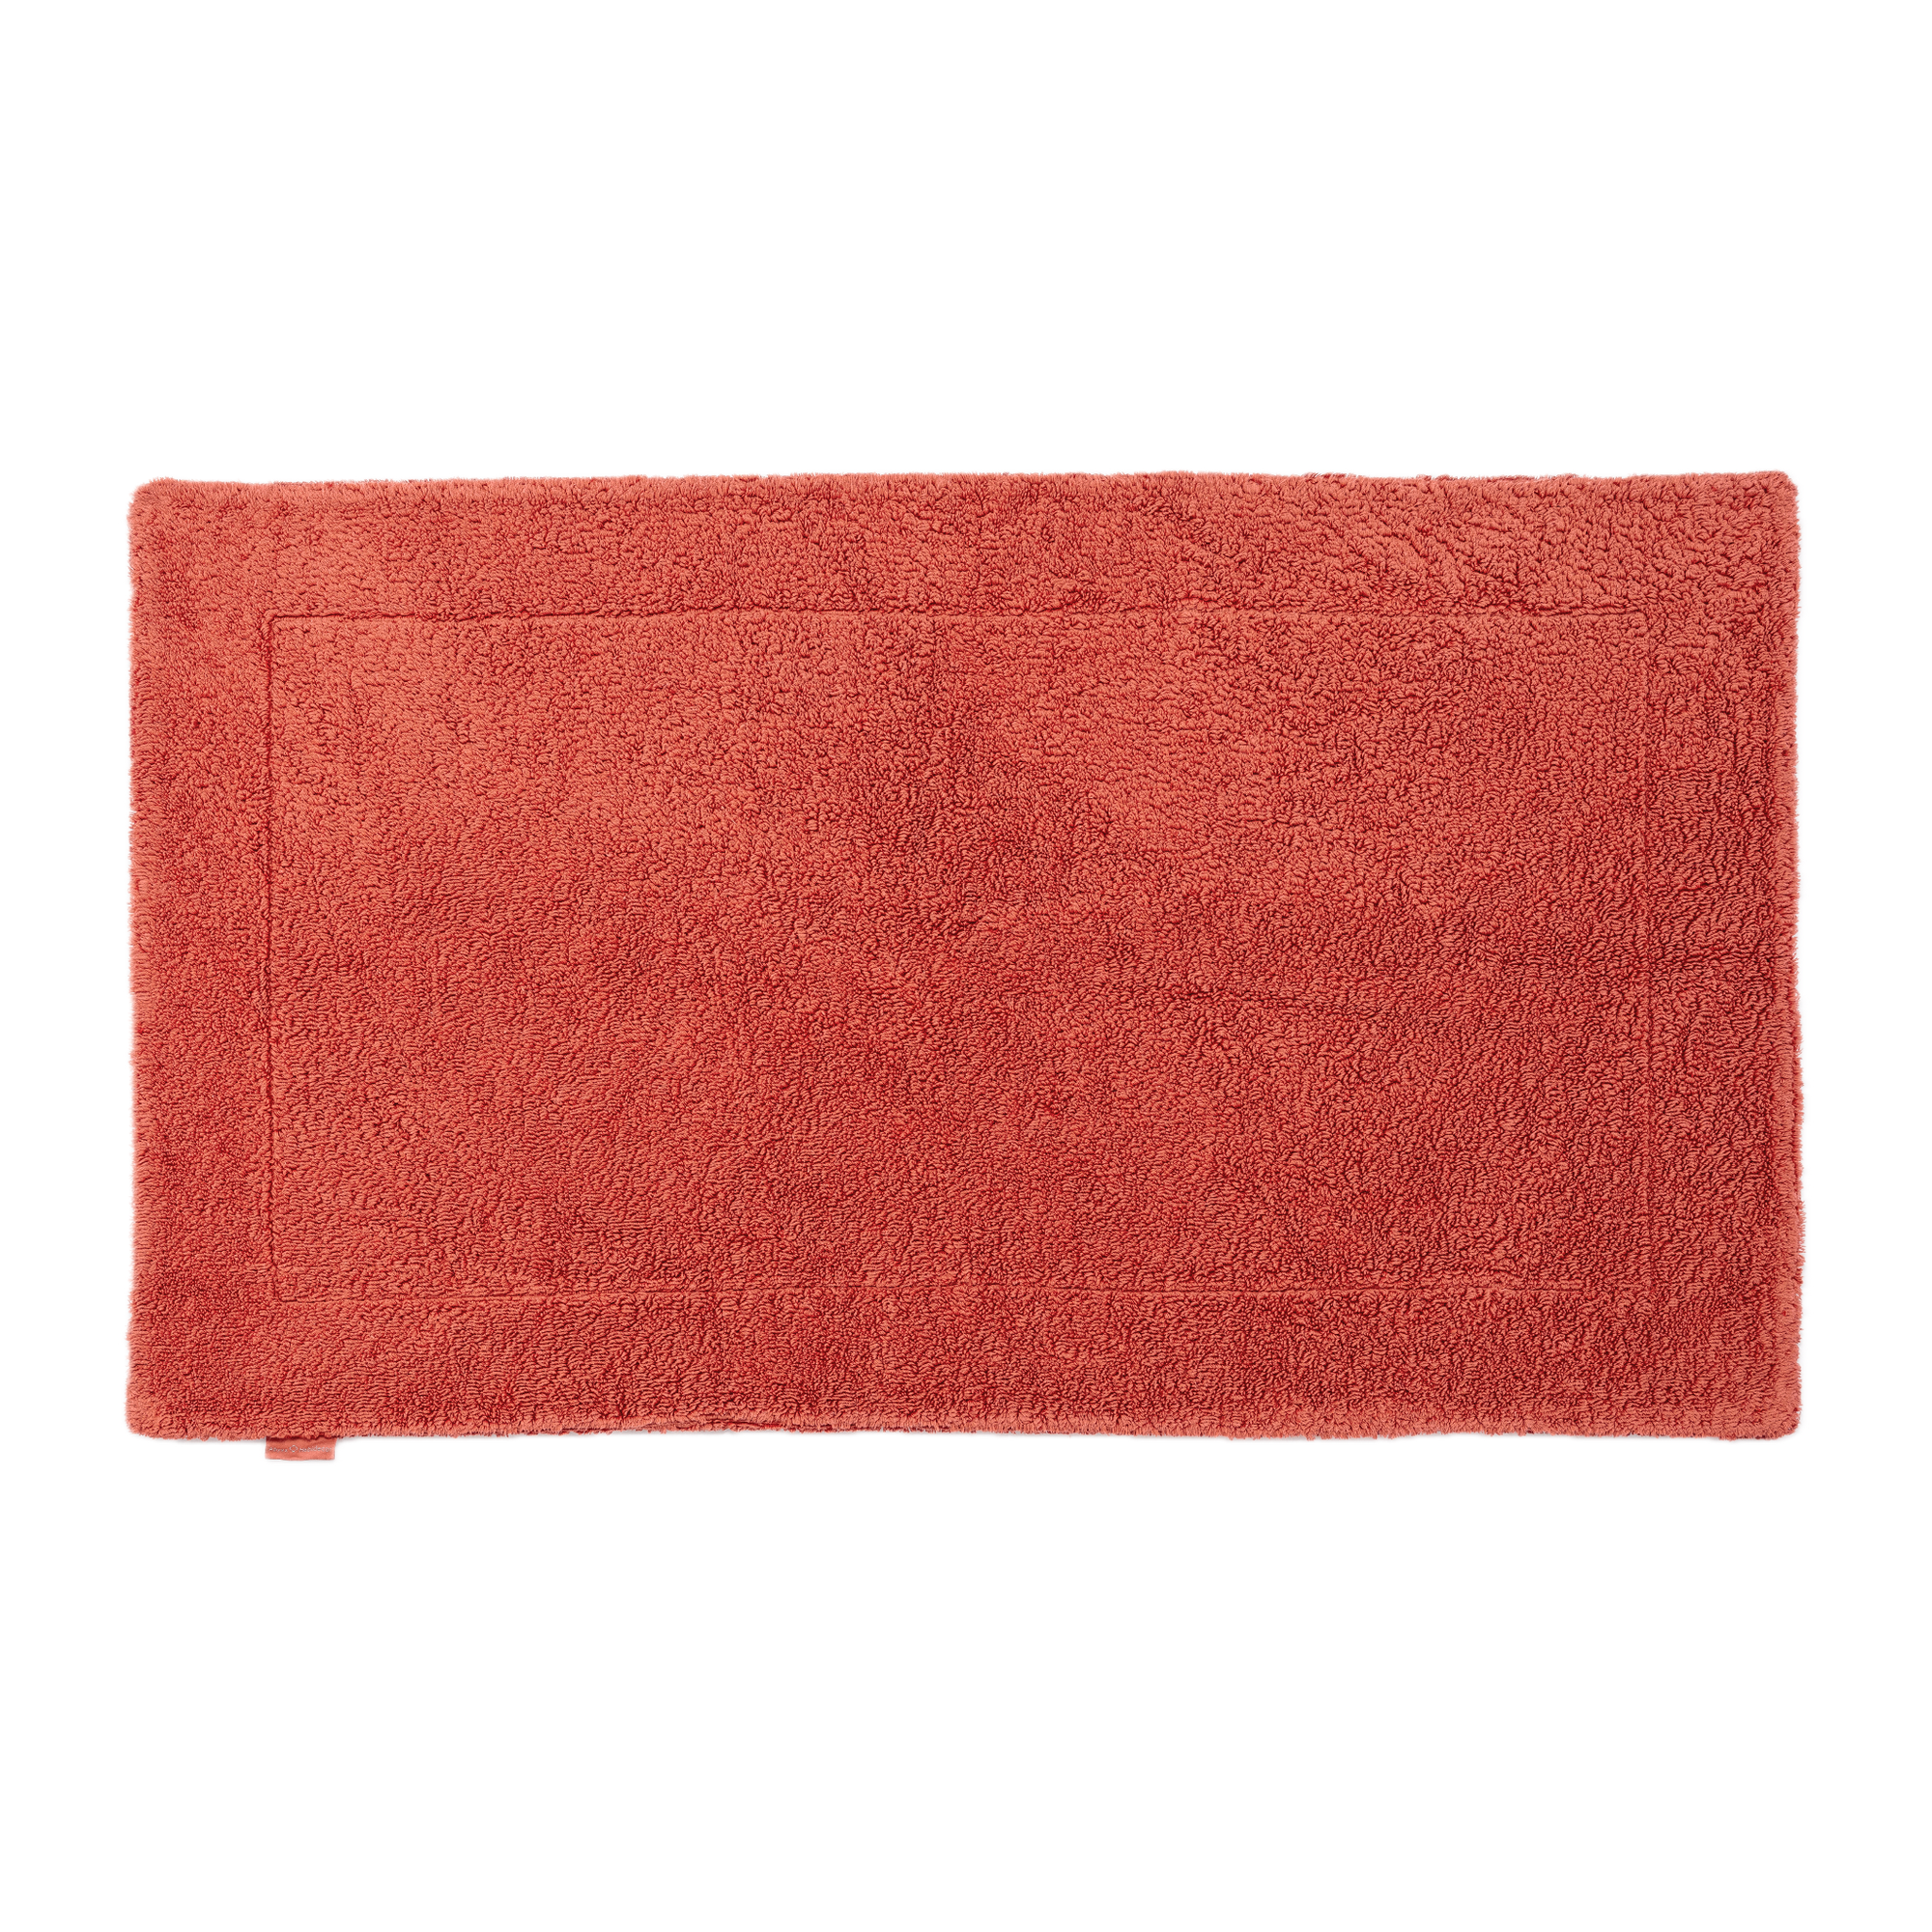 Abyss Double Bath Tub Mat in Chili (638) Color